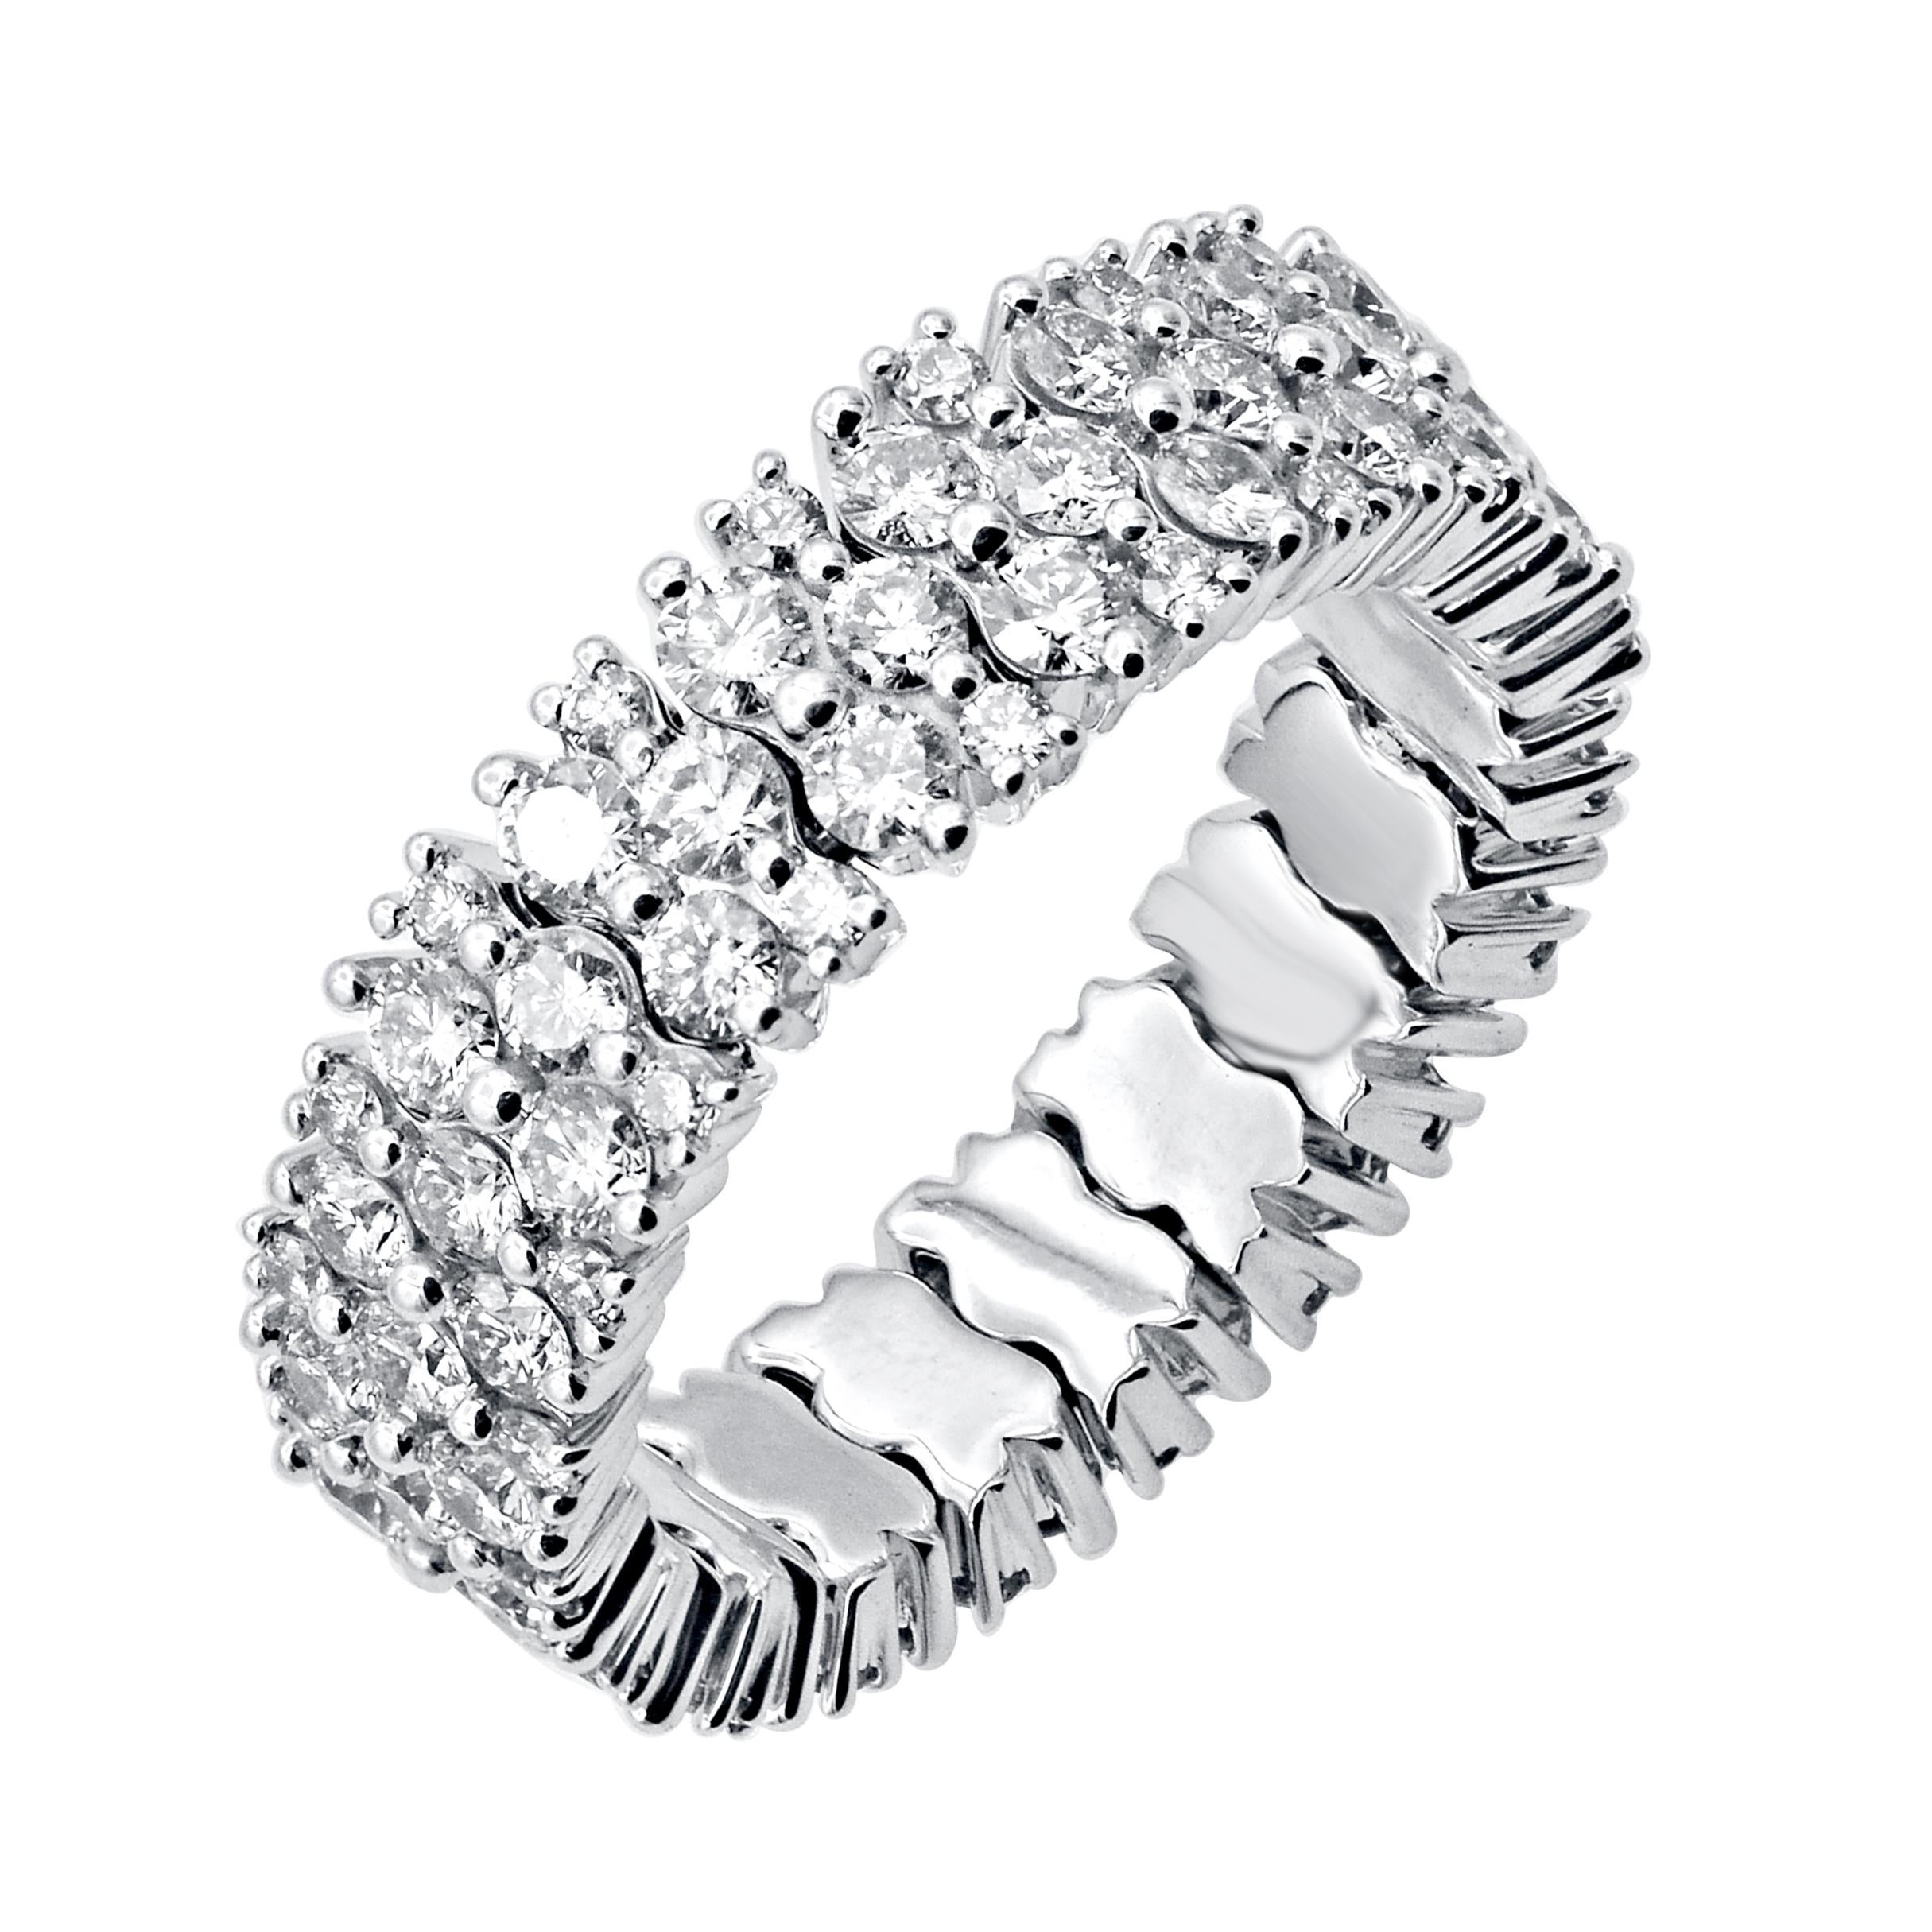 Honor the women you love with this eternity wedding band is expertly crafted in 14 Karat White Gold and features 100 brilliant cut round diamond set in prong setting. This eternity band has high polish finish and is a valuable addition to any